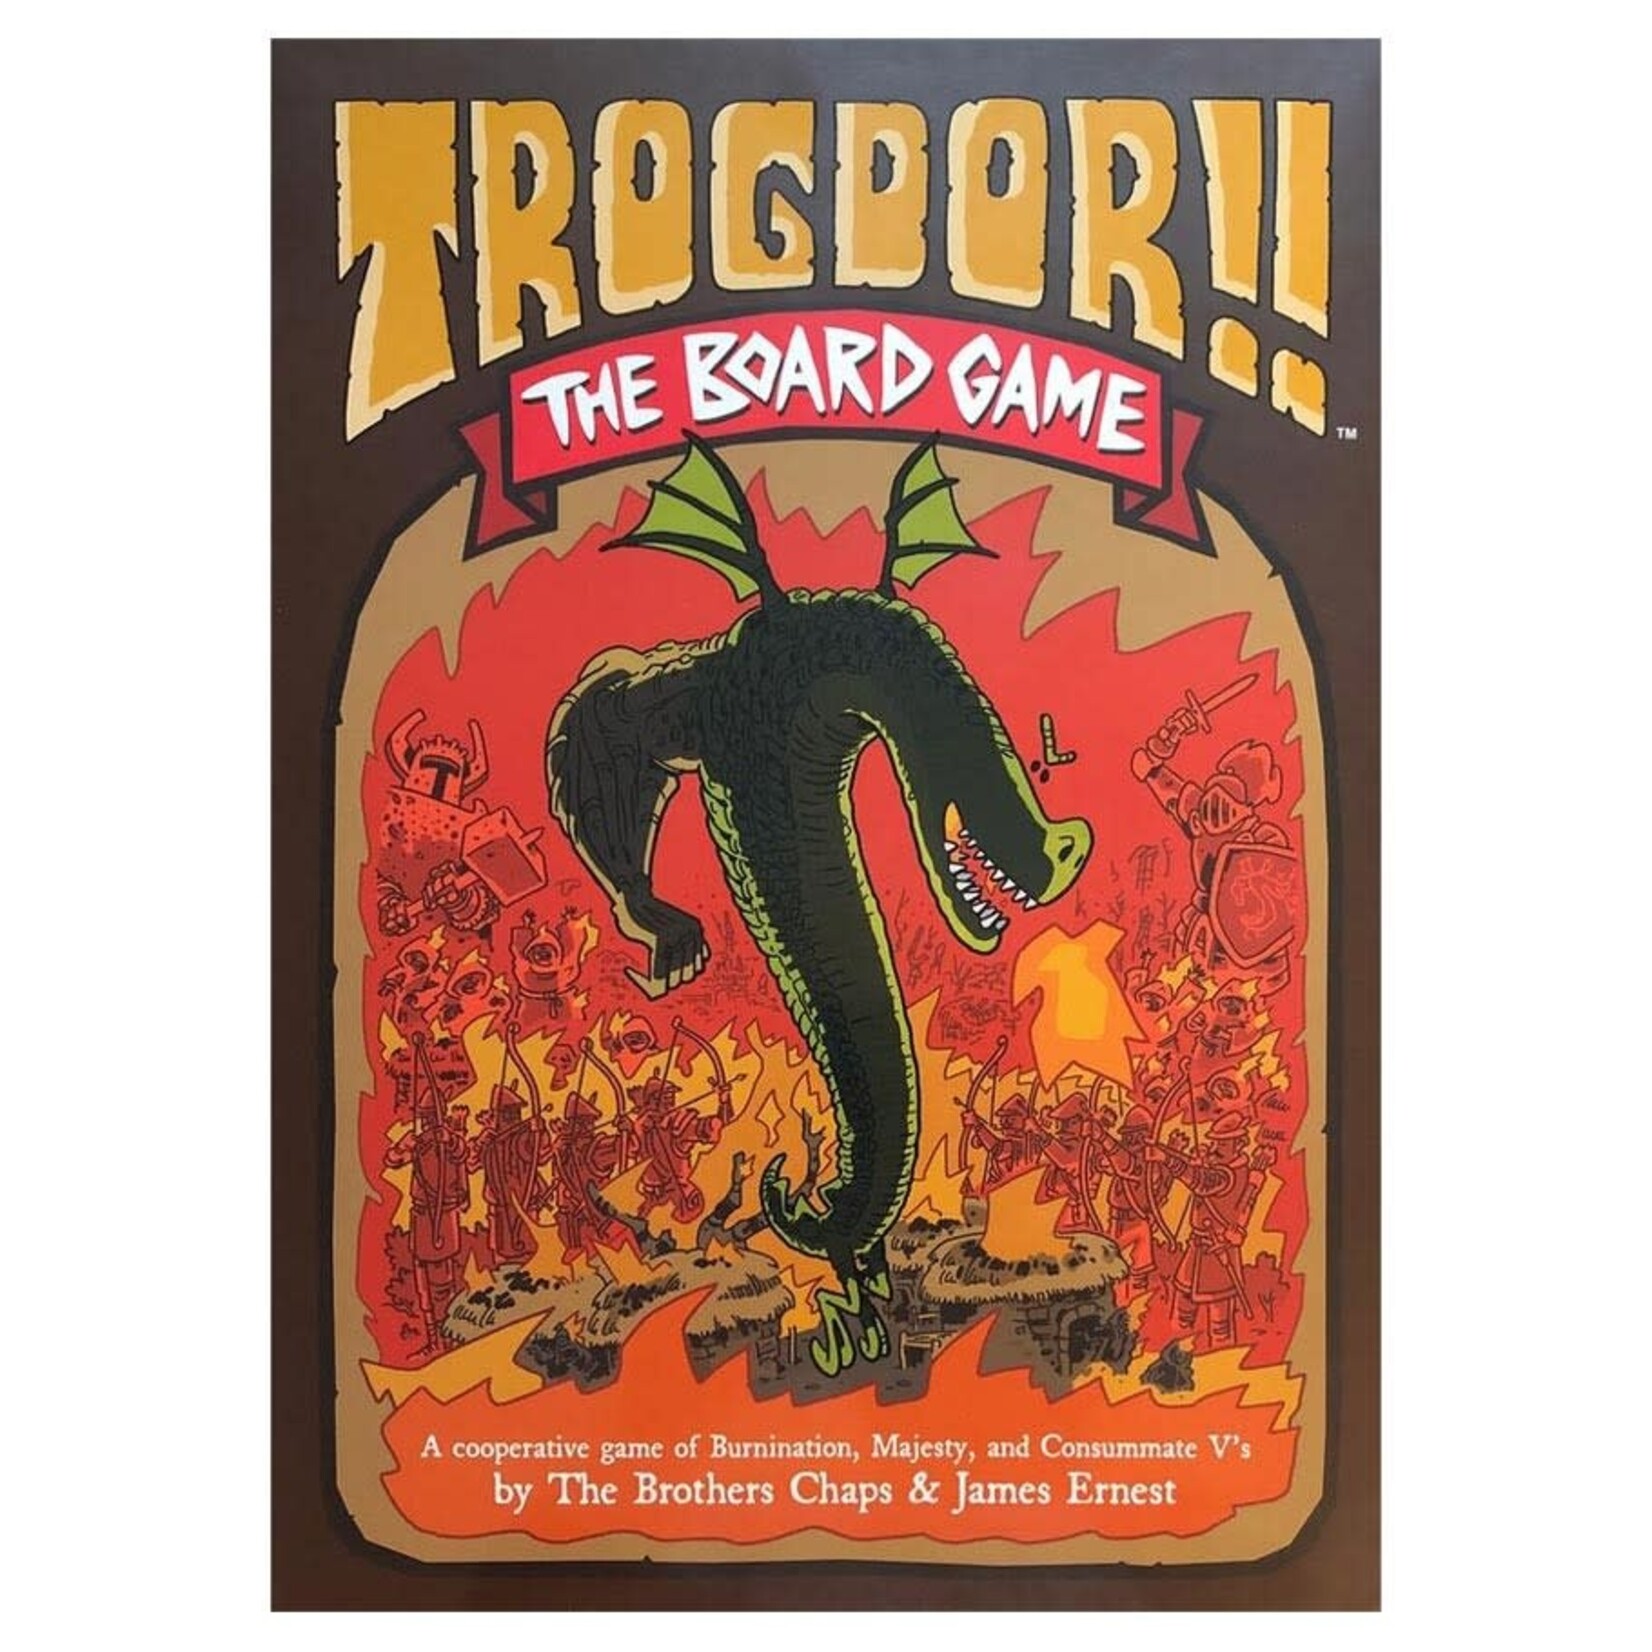 Home Star Runner Trogdor!! The Board Game